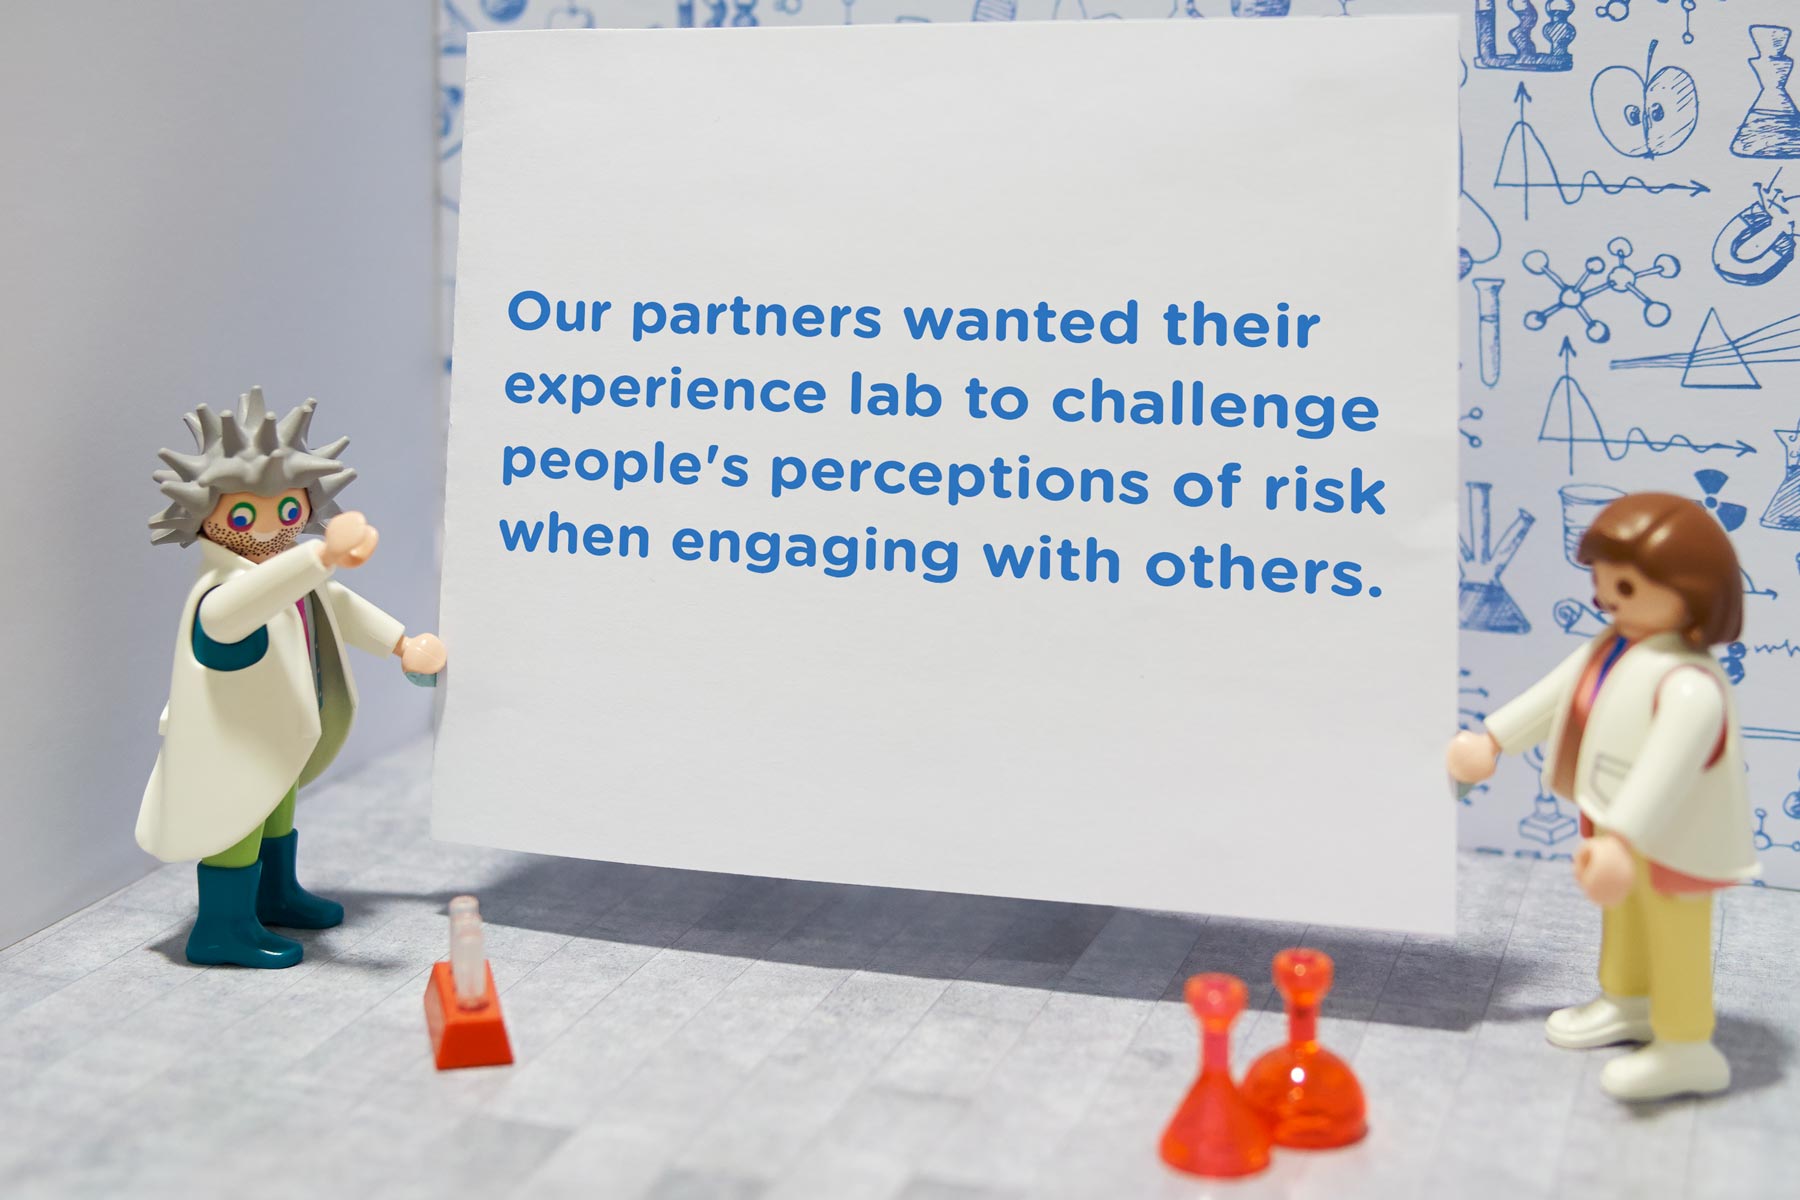 Our partners wanted their experience lab to challenge people's perceptions of risk when engaging with others.